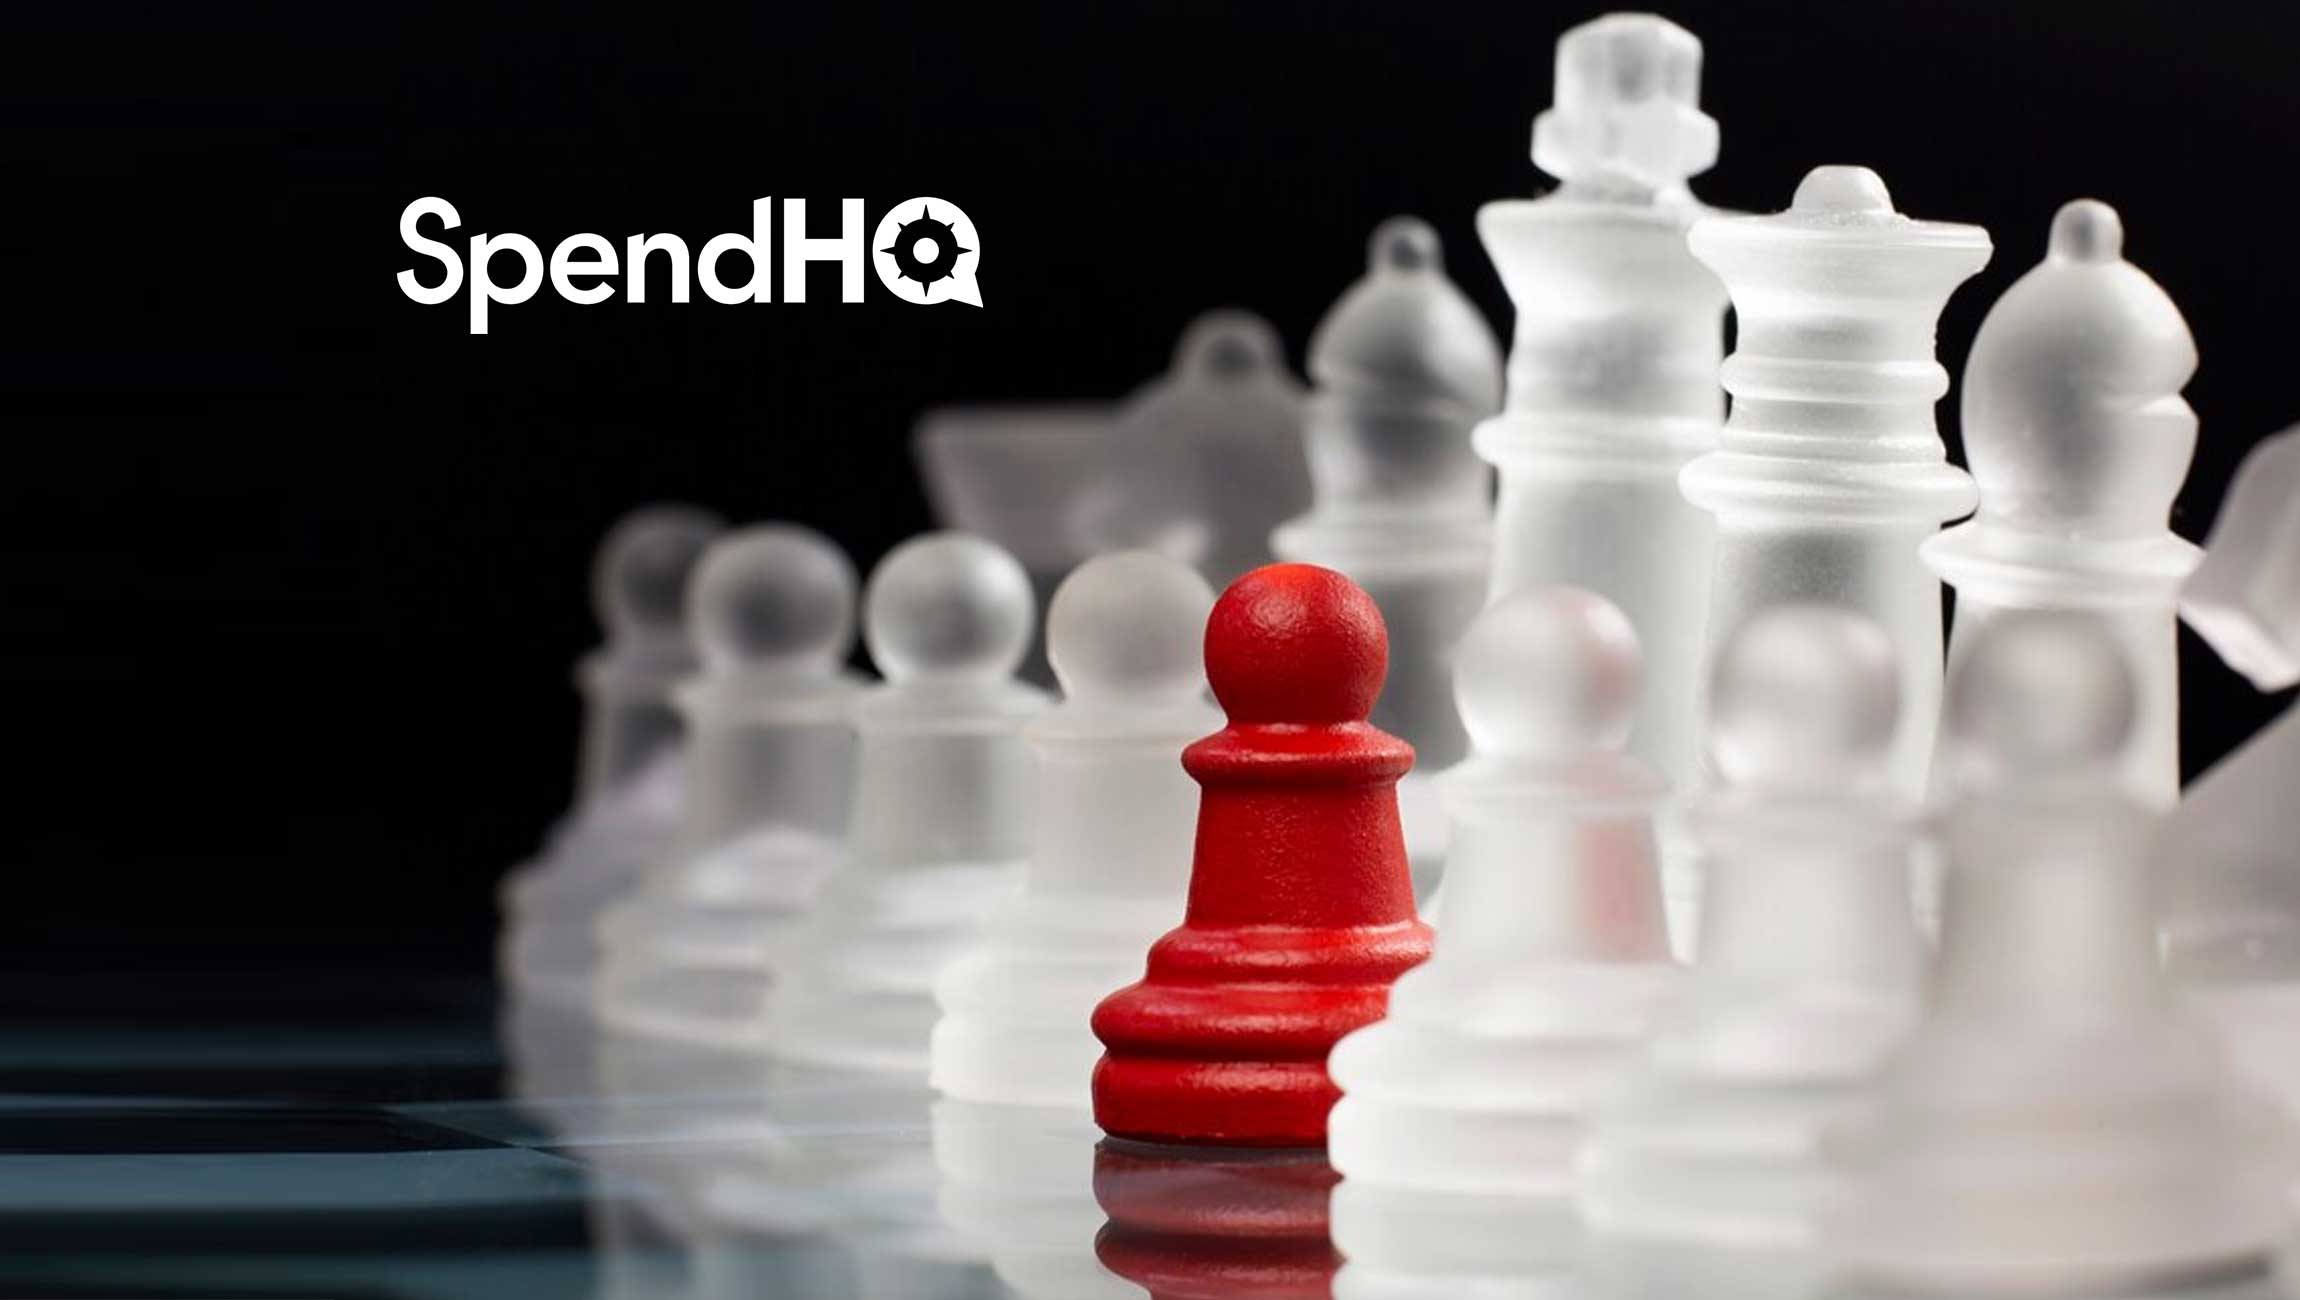 SpendHQ Appoints New Executives to Develop Next Phase of Growth & Data-Driven Innovation